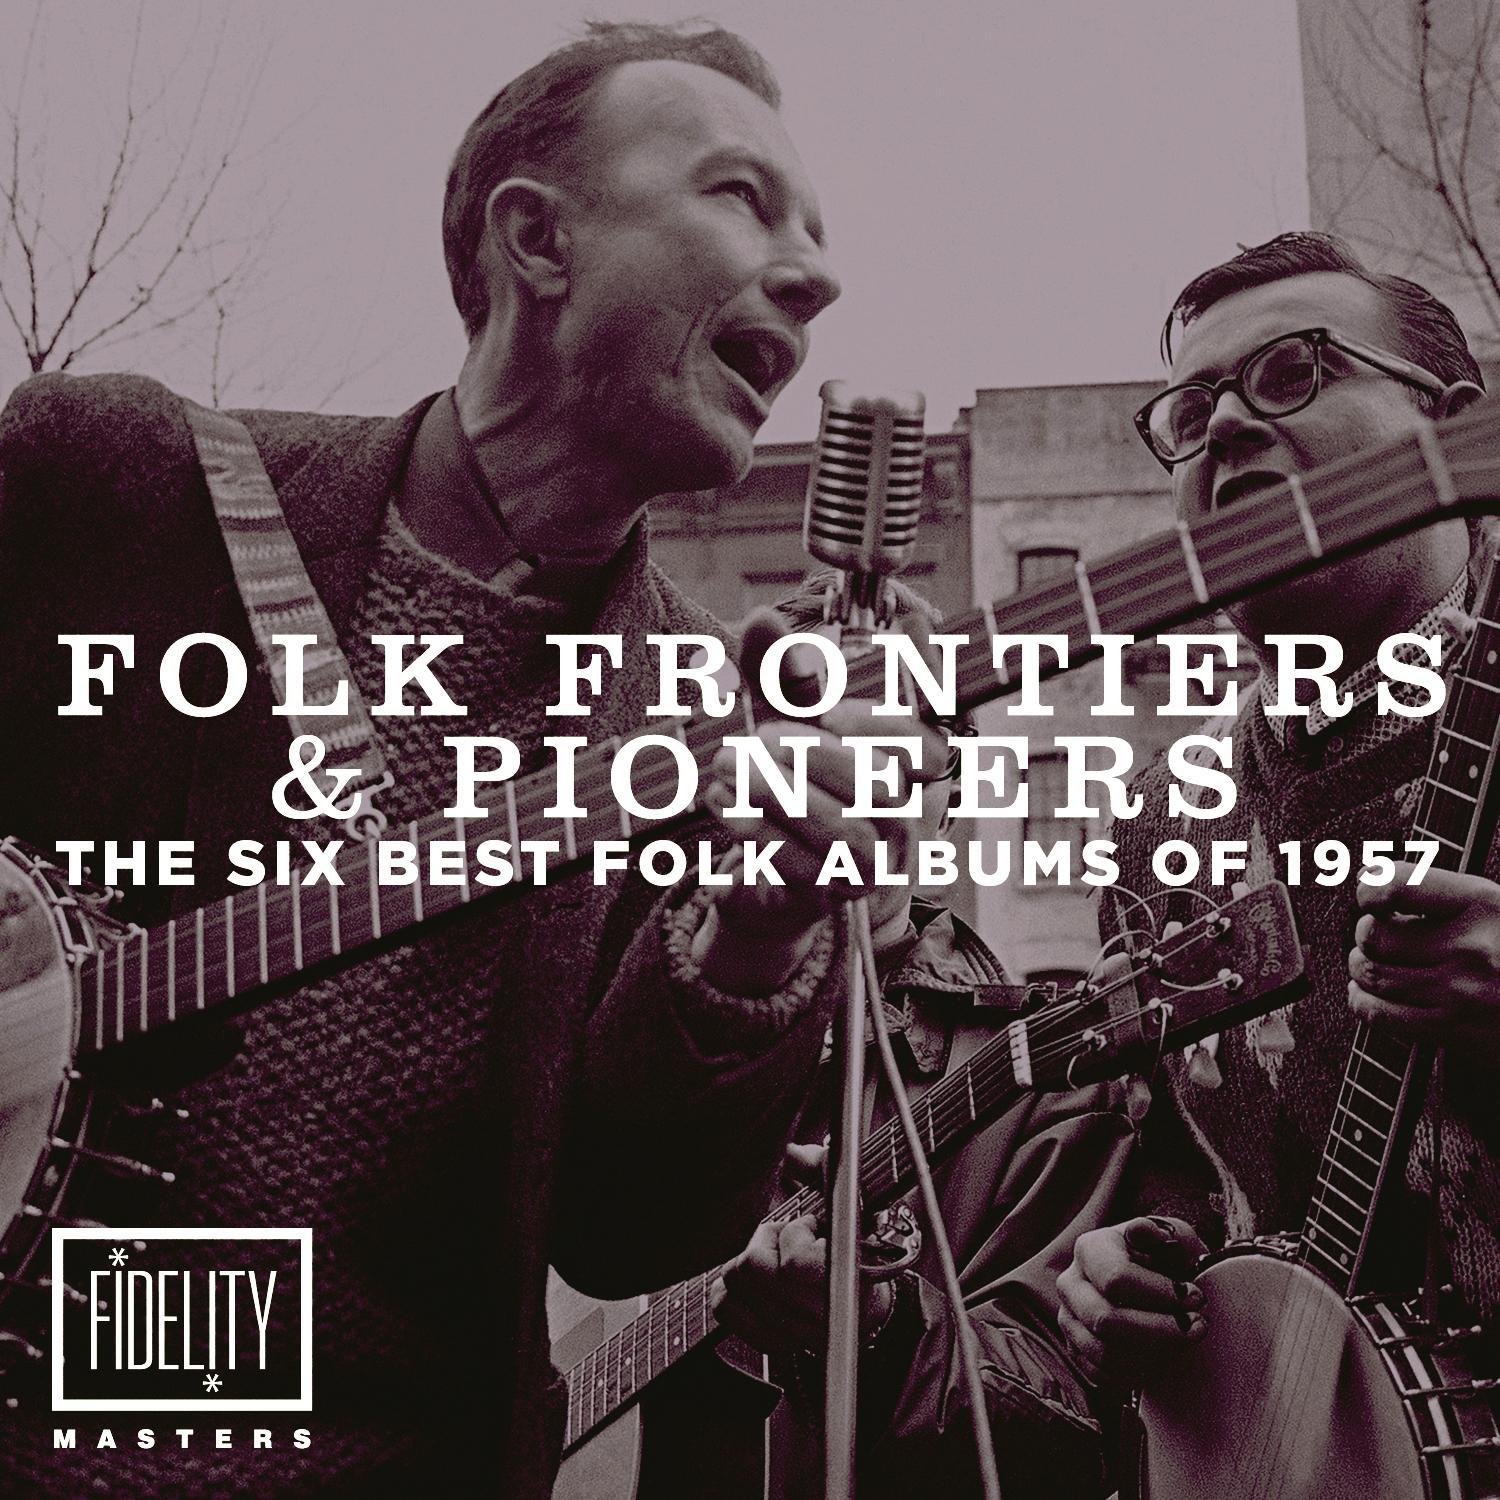 Folk Frontiers and Pioneers – the Six Best Folk Albums of 1957